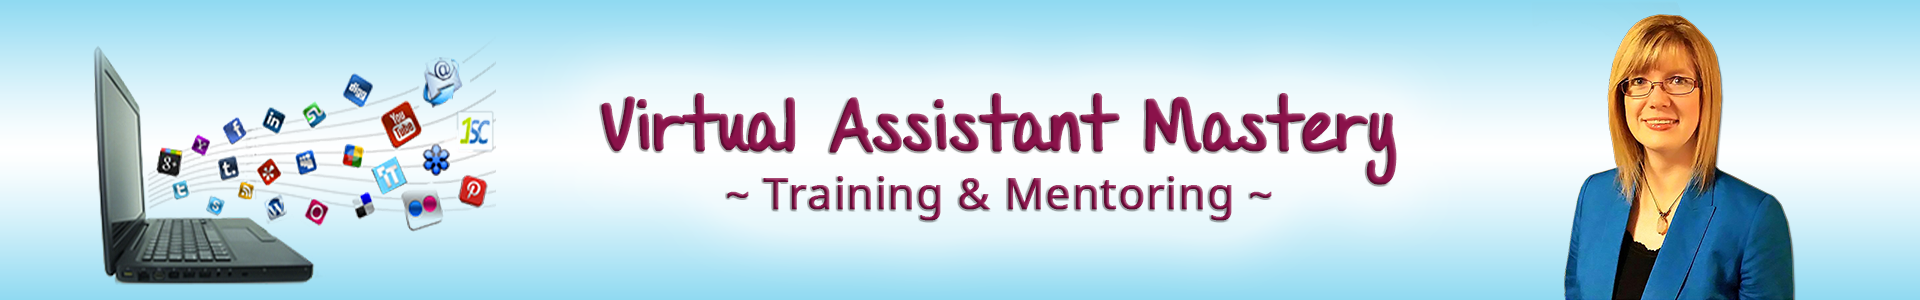 Virtual Assistant Mastery